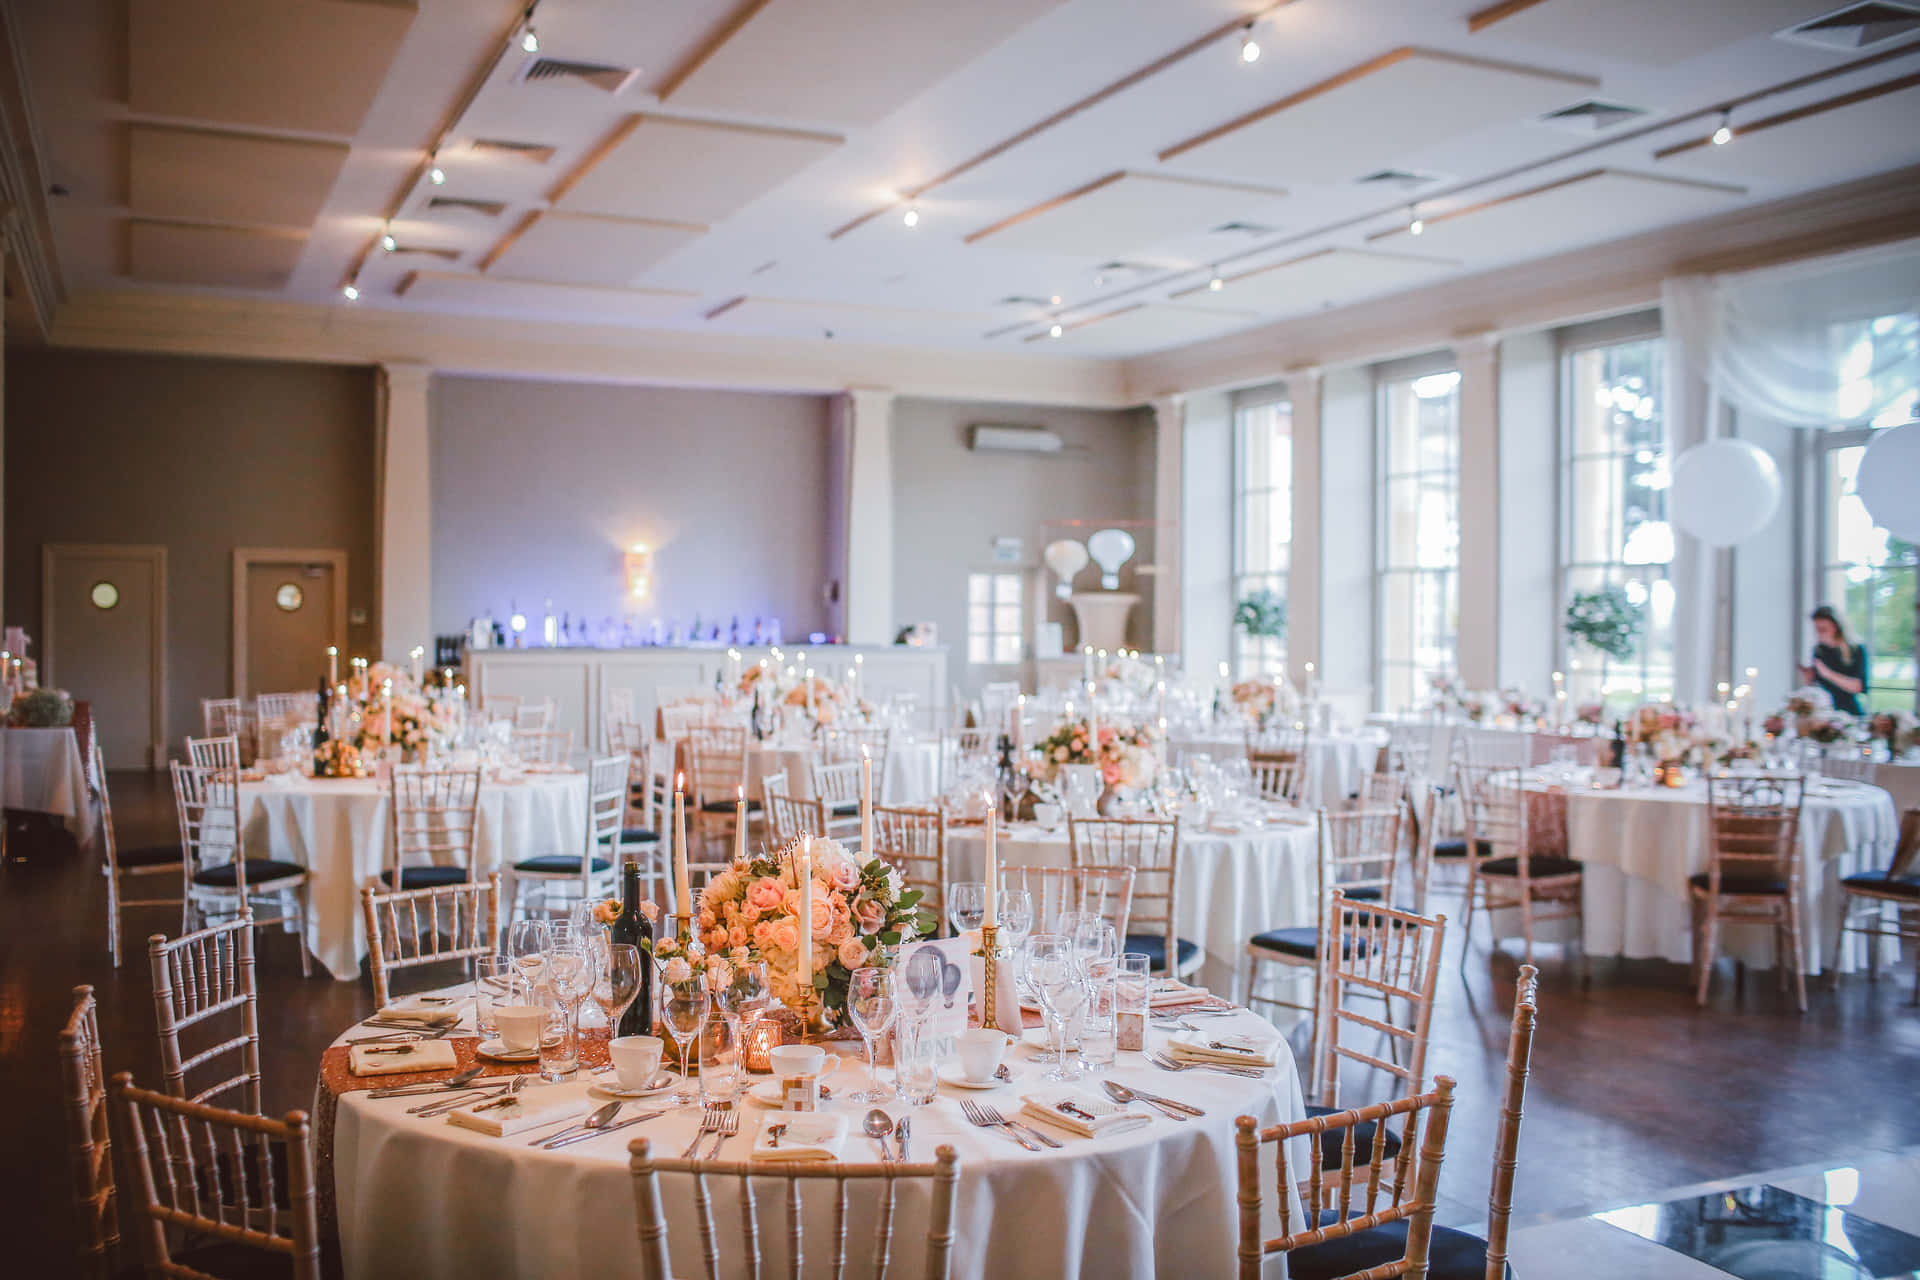 A grand ballroom perfect for any special event.